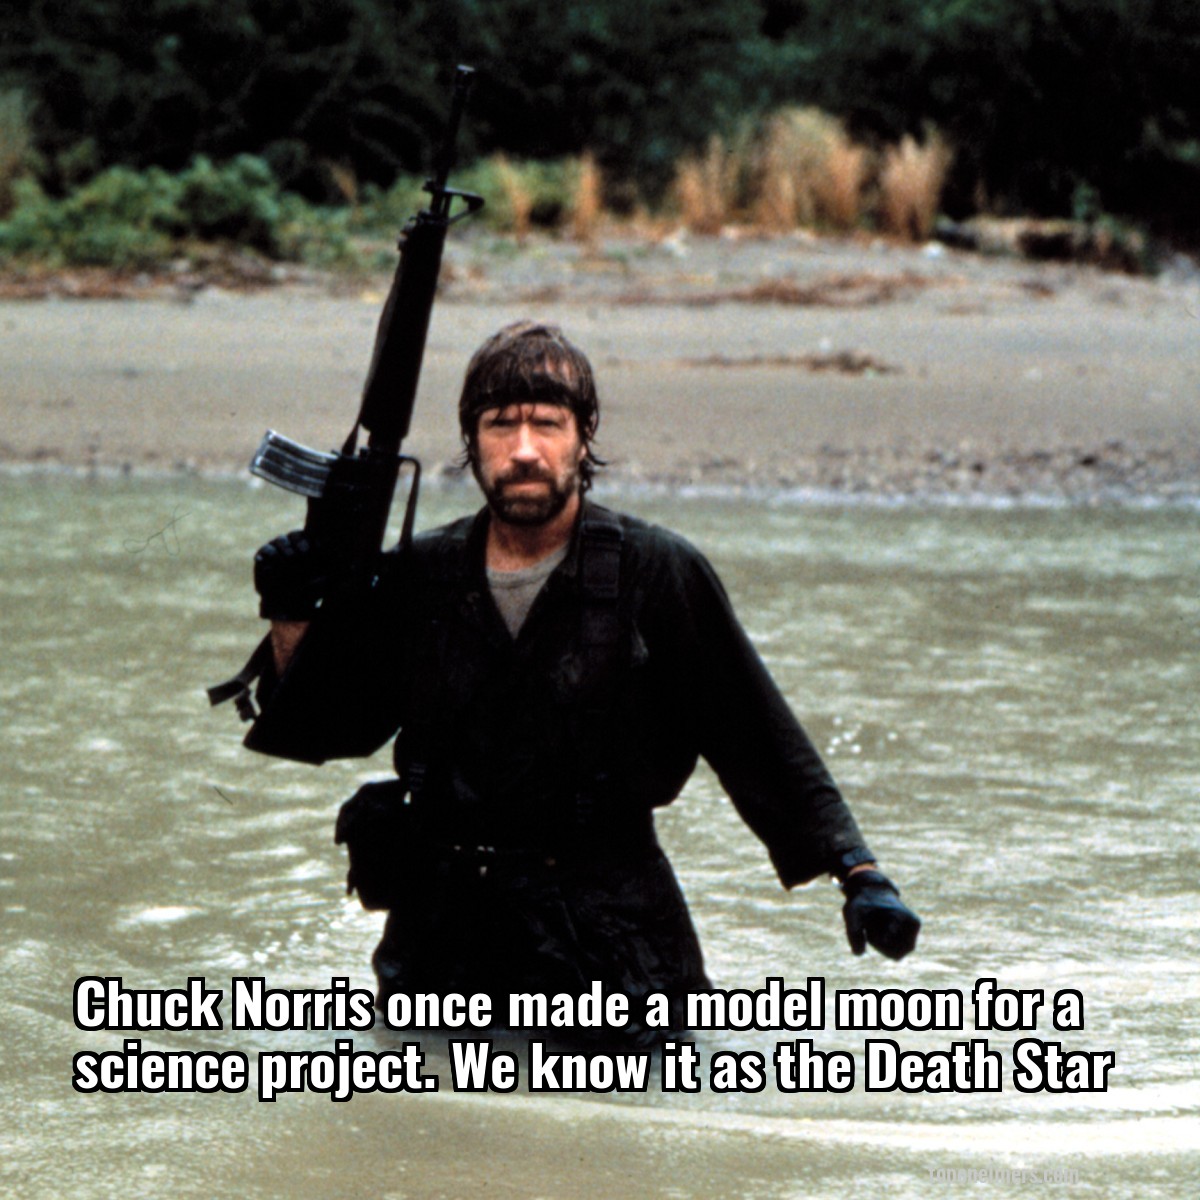 Chuck Norris once made a model moon for a science project. We know it as the Death Star